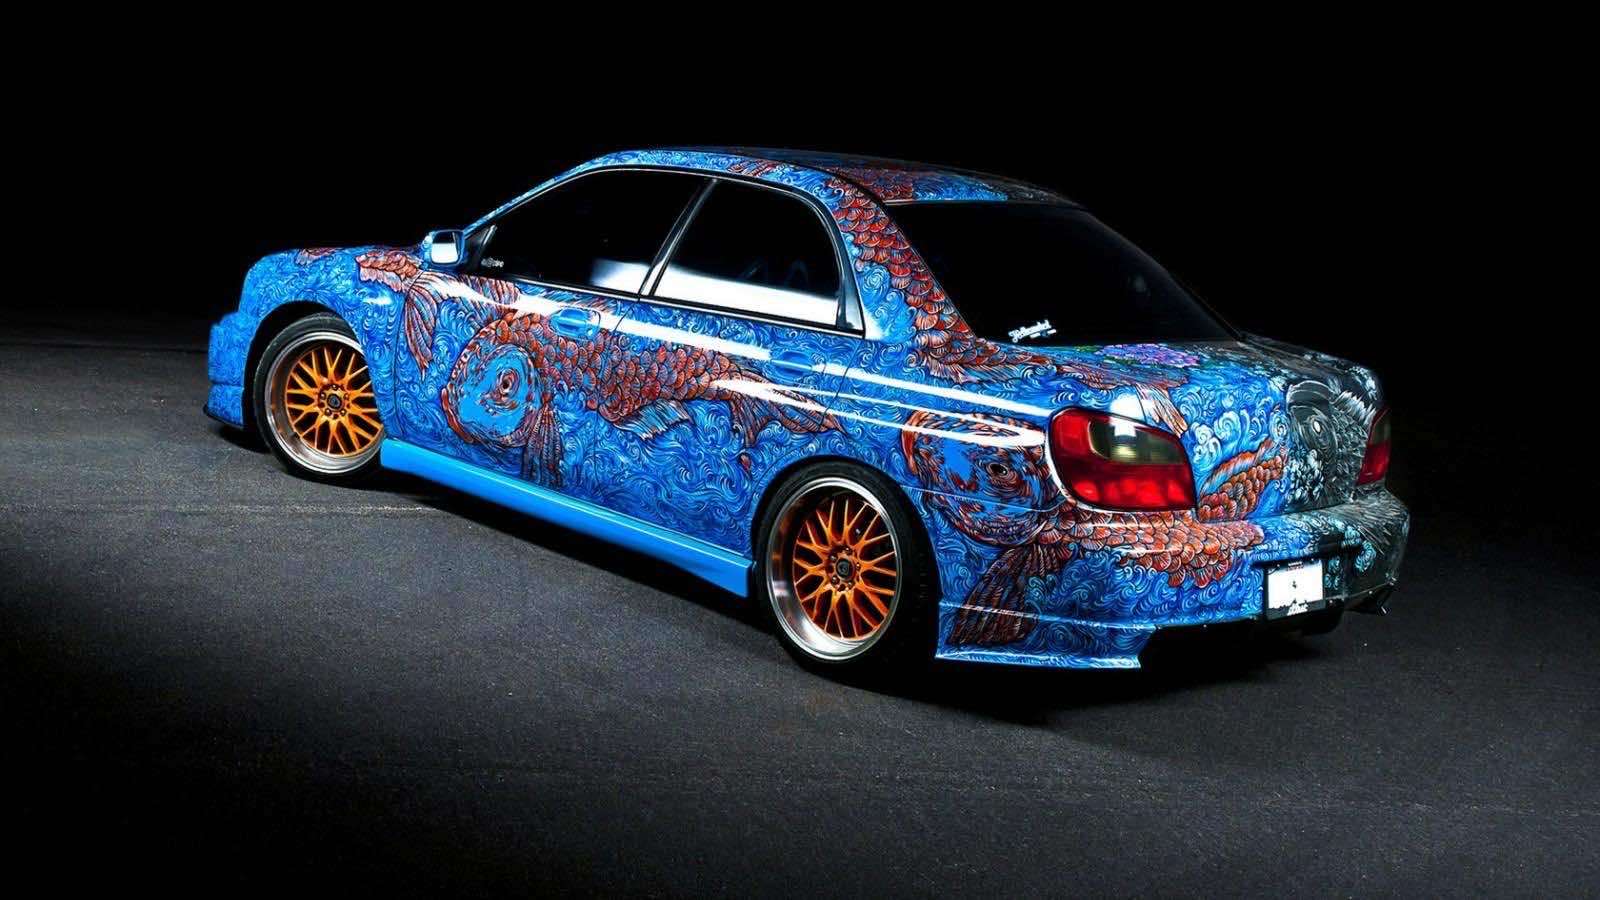 Large Collection Of Hd Subaru Wallpapers Subaru Background Images For Download